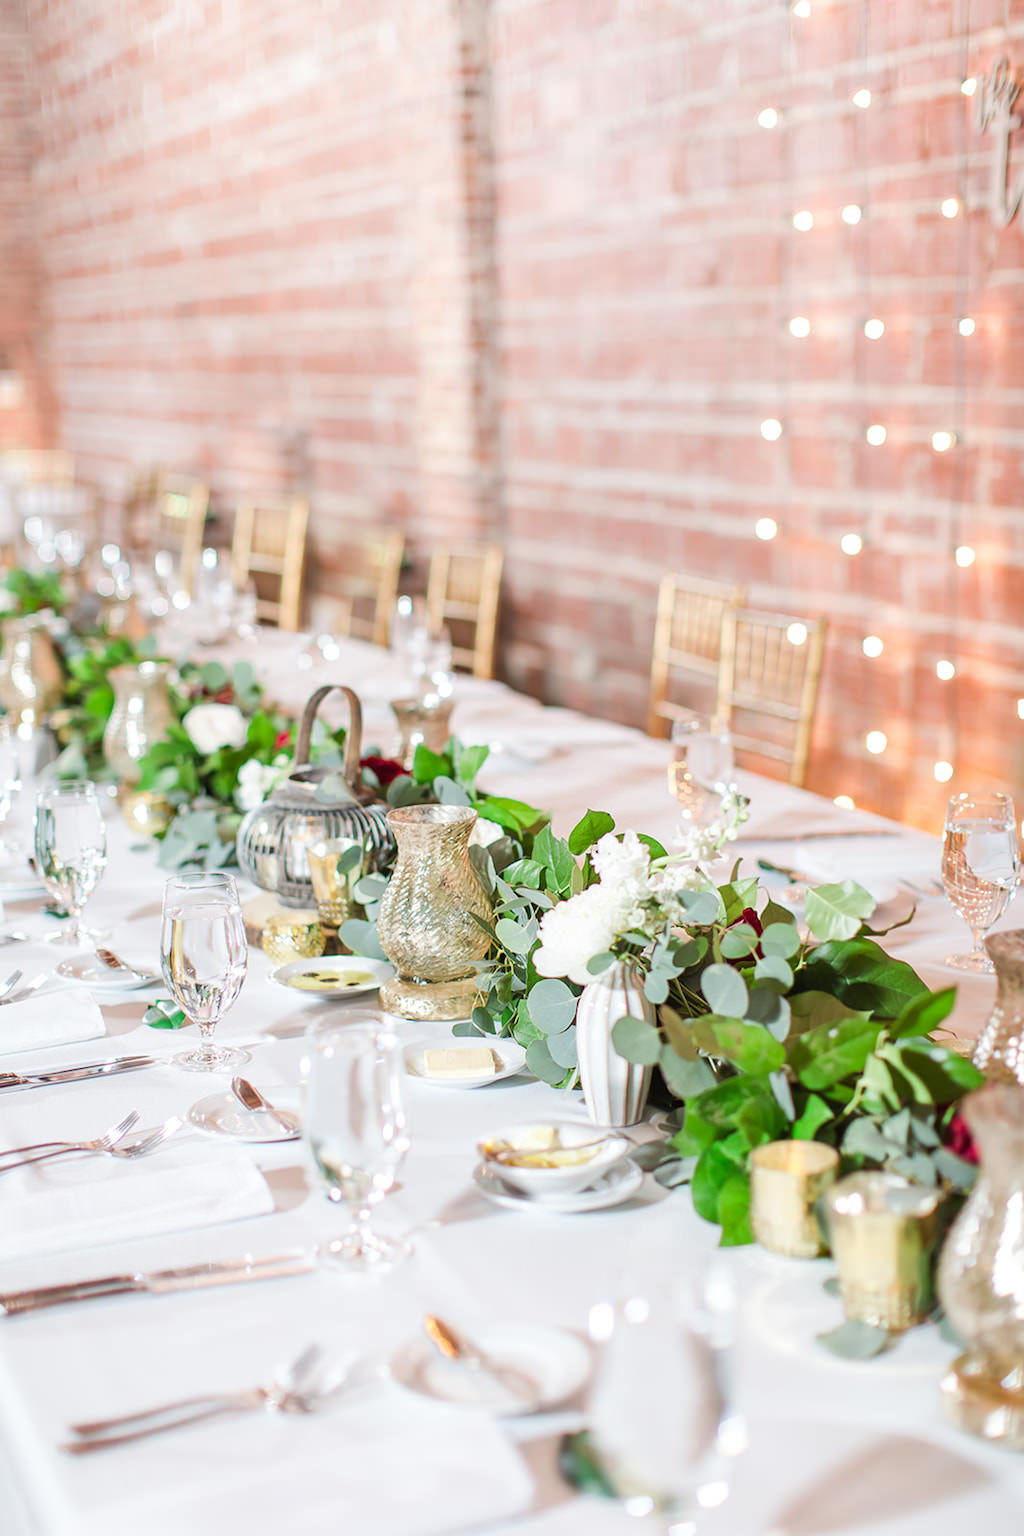 Rustic Chic Inspired Wedding Decor at Feasting Table, Romantic Greenery Eucalyptus Leaves with White and Red Floral Garland Centerpiece, Nature Inspired Lanterns, Mercury Glass Vases, Gold Chiavari Chairs, Against Exposed Red Brick Wall with Indoor String Lighting | Tampa Bay Unique Wedding Venue NOVA 535 | St. Pete Luxury Wedding Photographers Shauna and Jordon Photography